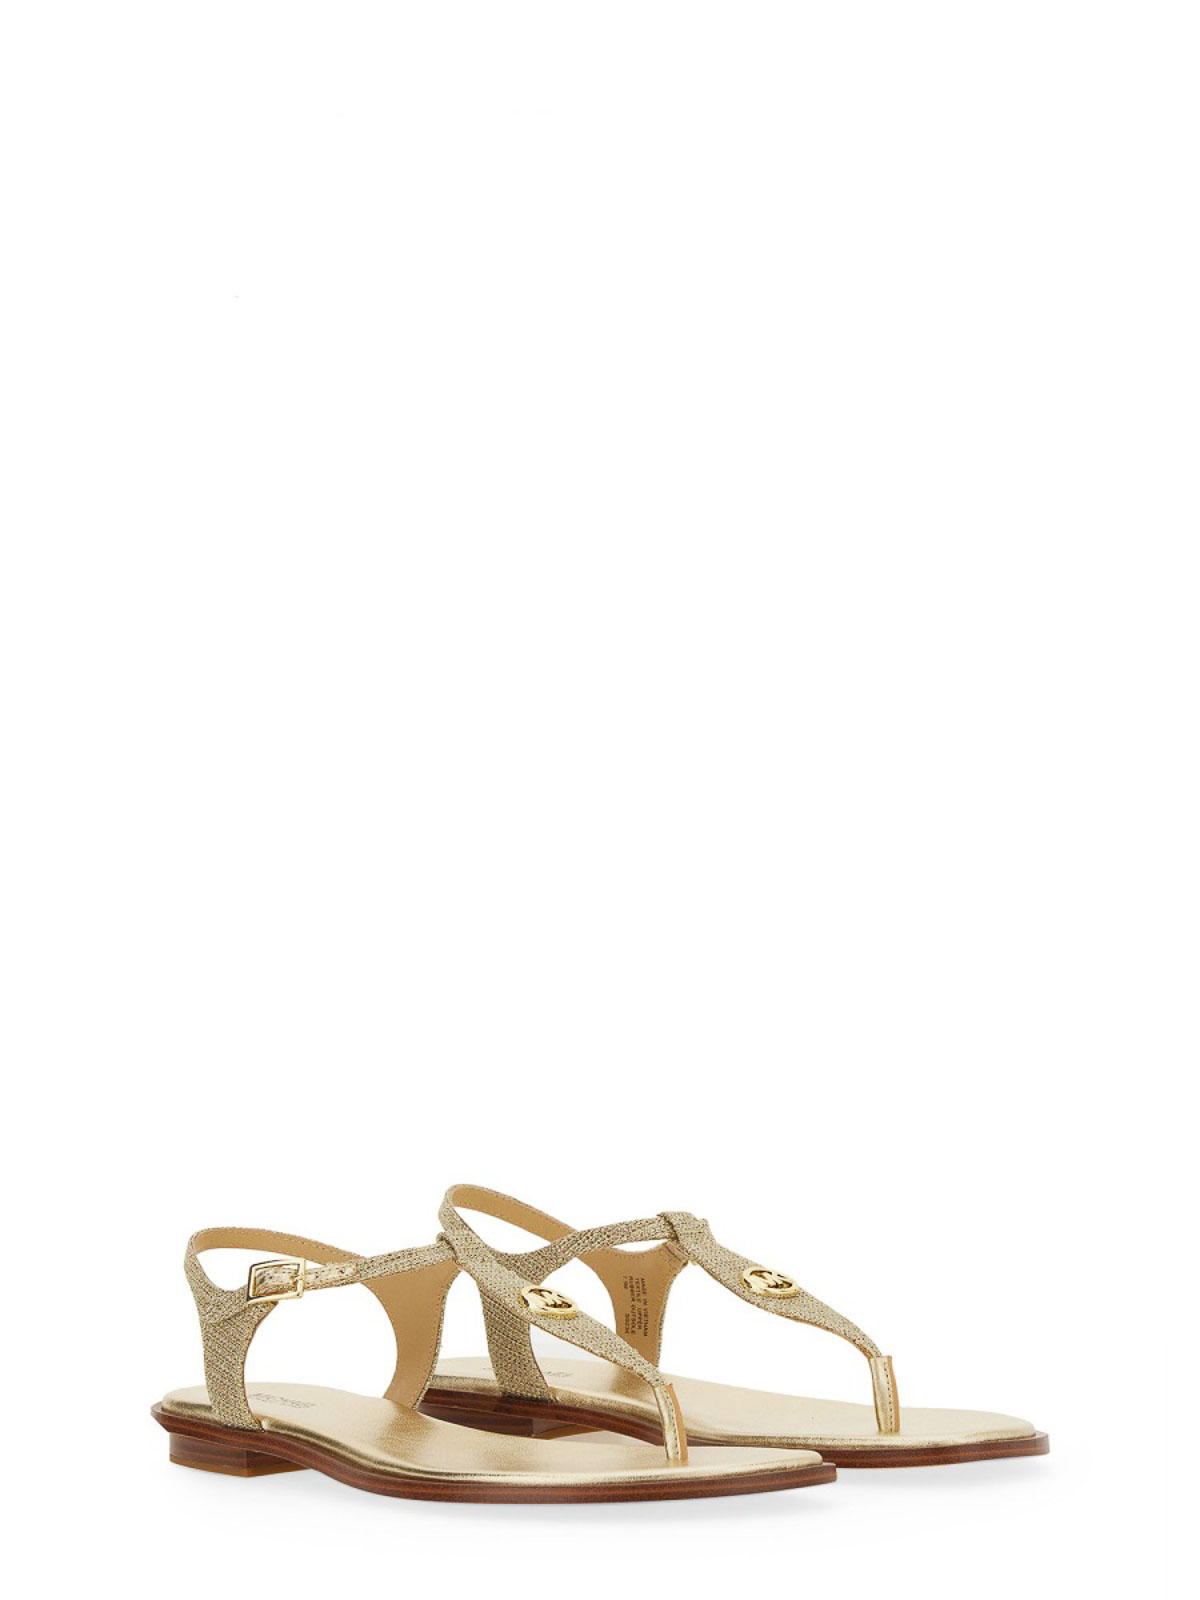 Shop Michael Kors Mallory Sandals In Gold